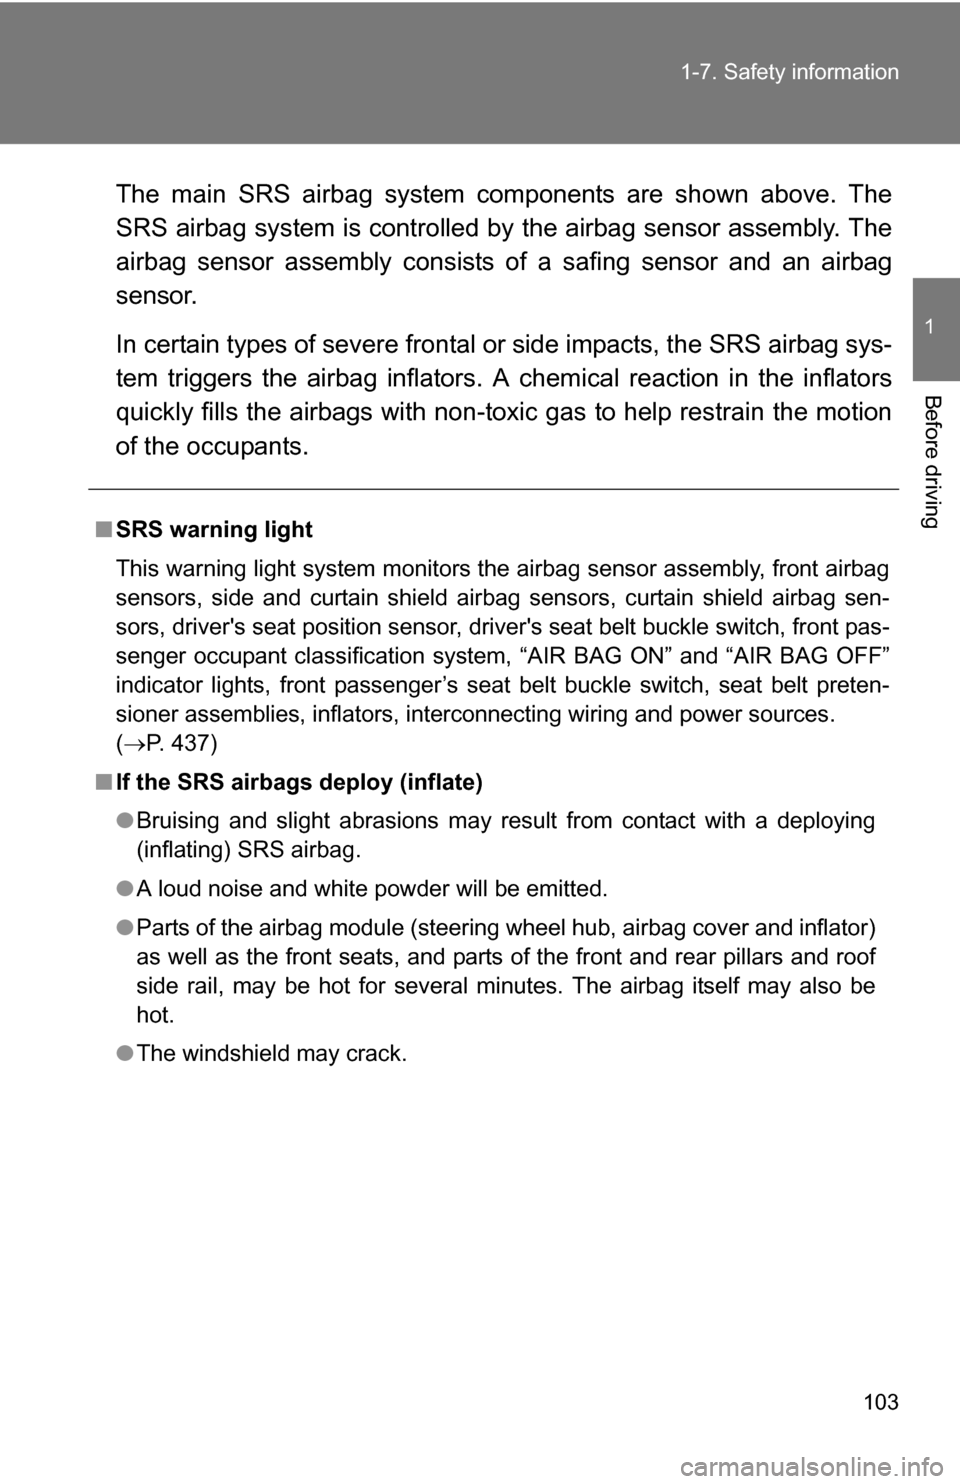 TOYOTA RAV4 2012 XA30 / 3.G Owners Manual 103
1-7. Safety information
1
Before driving
The main SRS airbag system components are shown above. The
SRS airbag system is controlled by
 the airbag sensor assembly. The
airbag sensor assembly consi